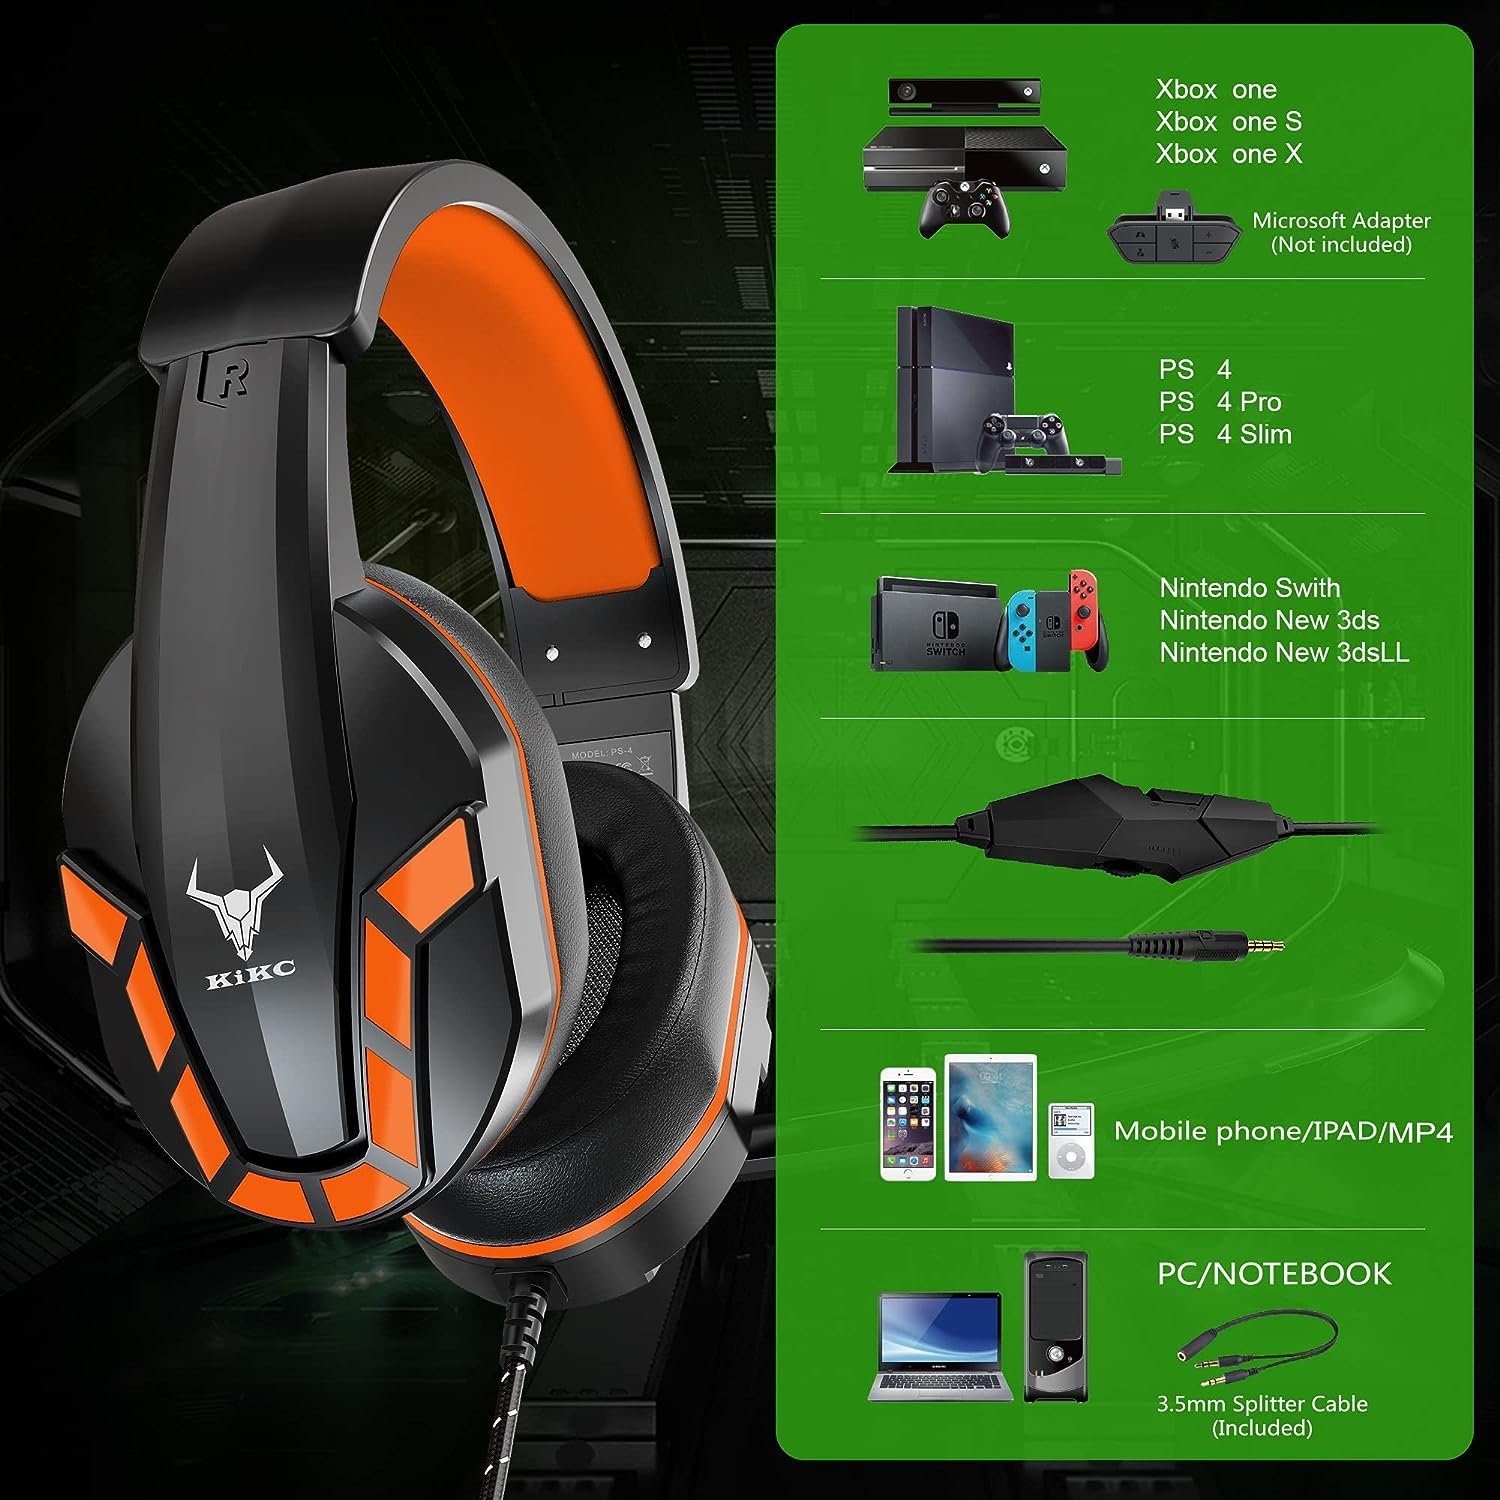 Kikc PS4 Gaming Headset with Mic for Xbox One, PS5, PC, Mobile Phone and Notebook, Controllable Volume Gaming Headphones with Soft Earmuffs for Kid